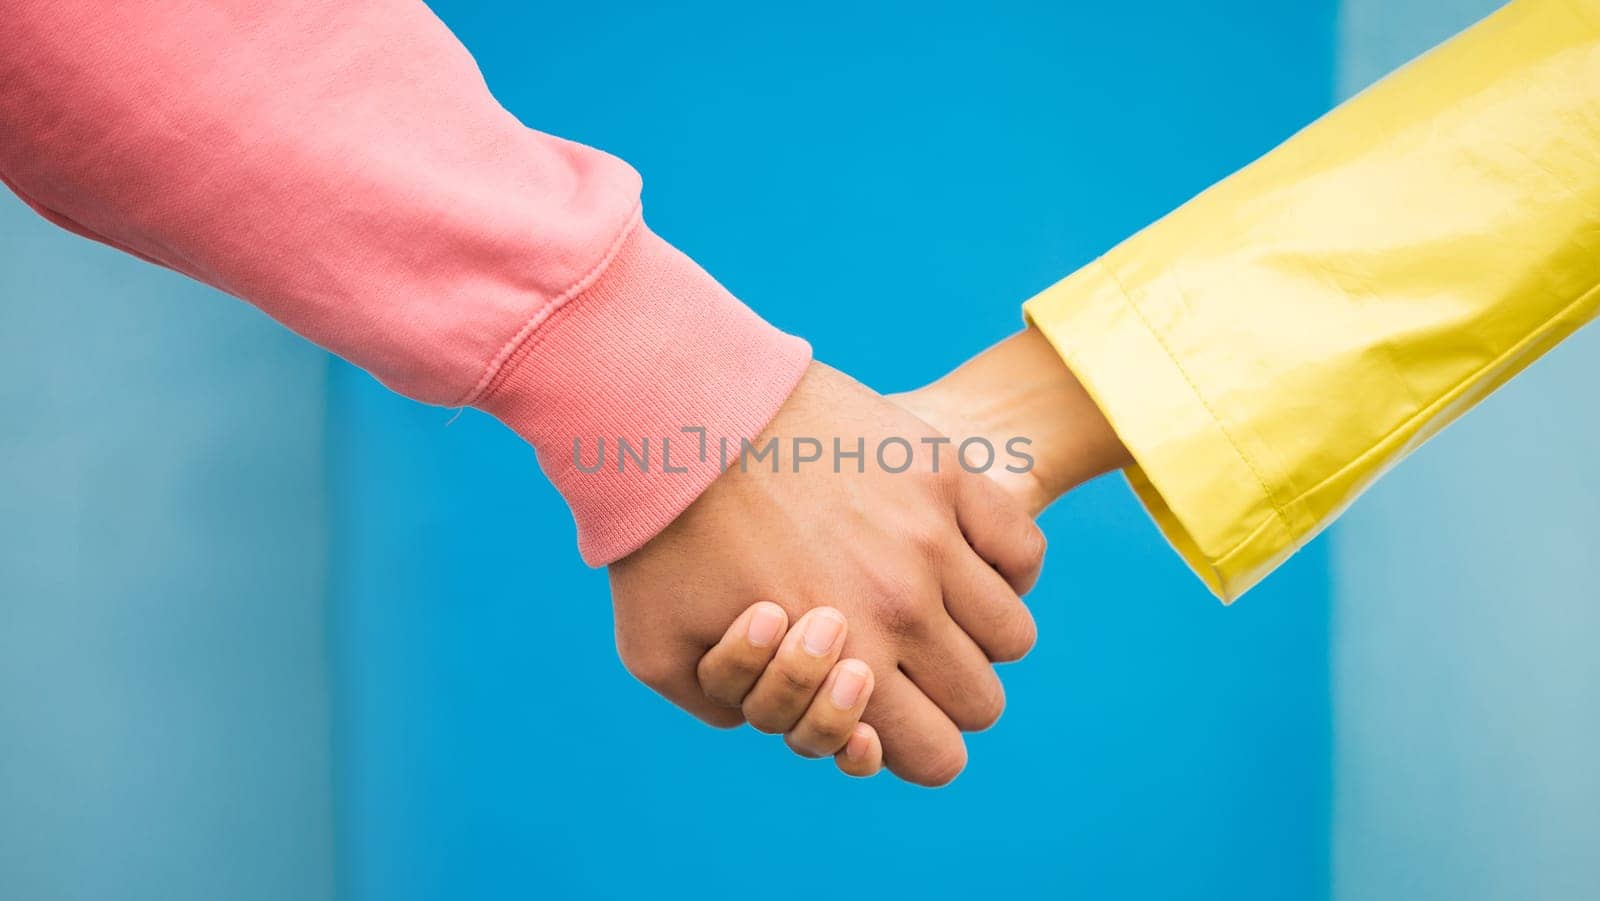 Couple, love and holding hands together for support care, relationship and bonding in blue background studio. Man, woman and hand for partnership, romance trust and solidarity or compassion lifestyle.